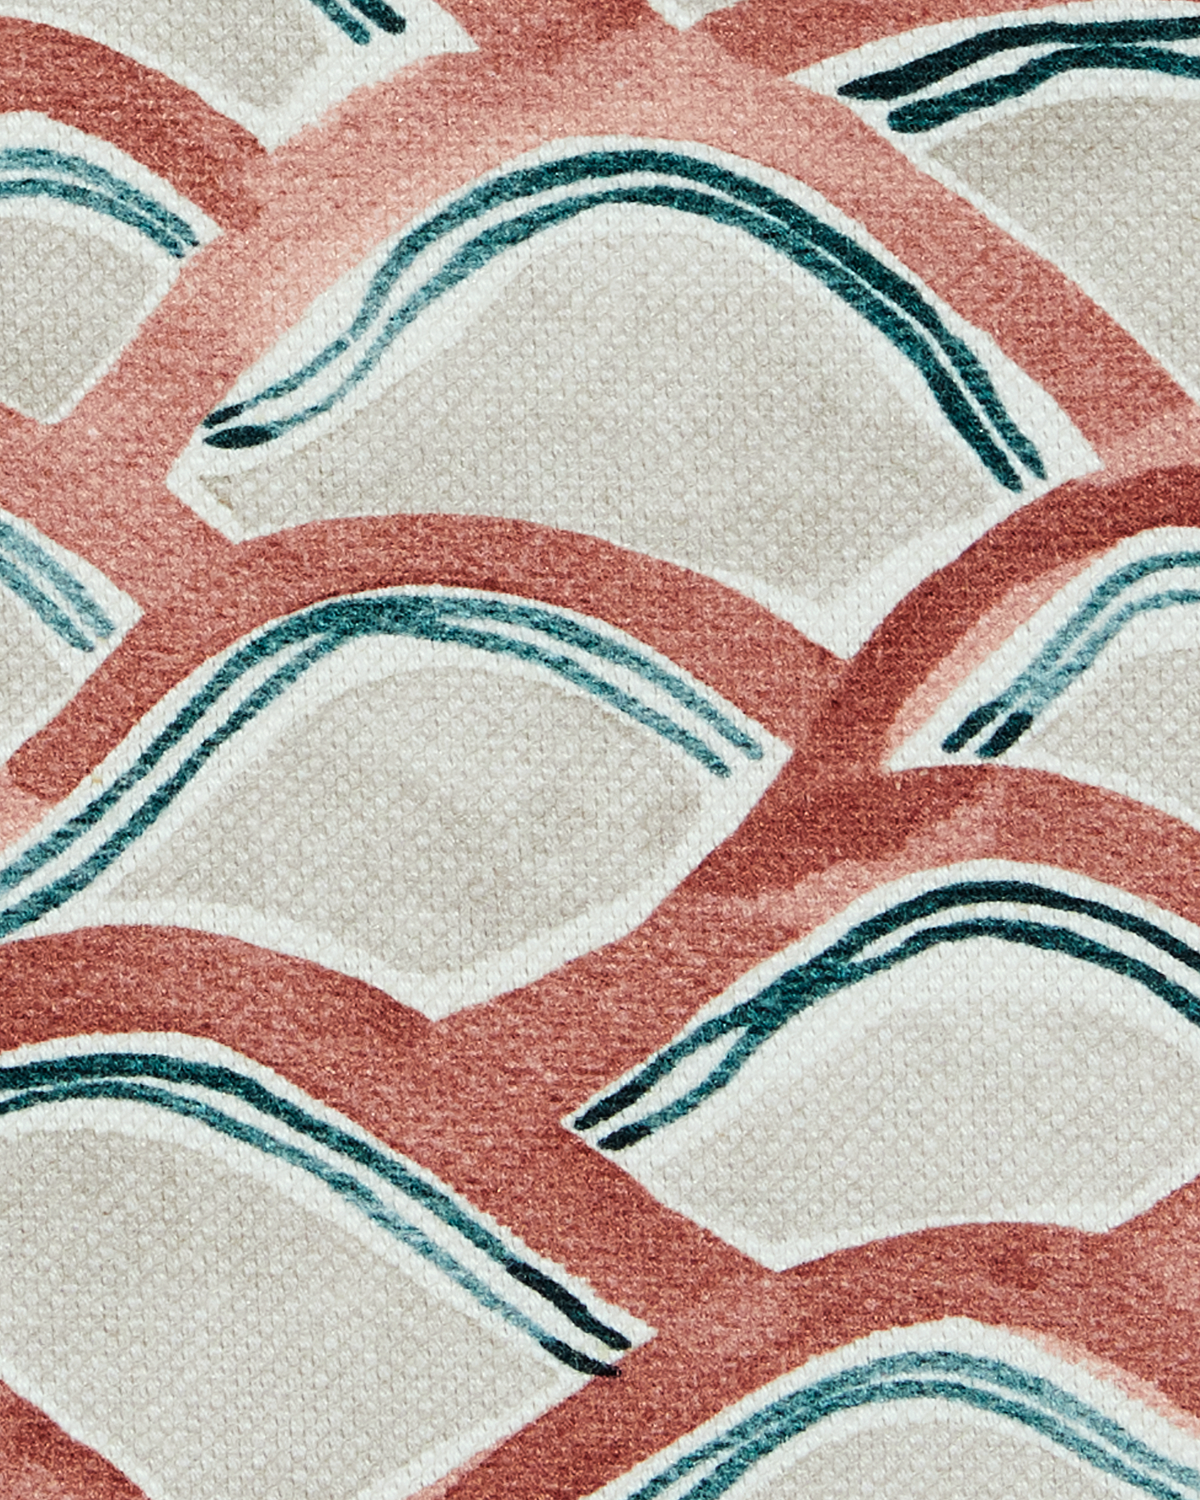 Mountains Fabric in Rose/Marine